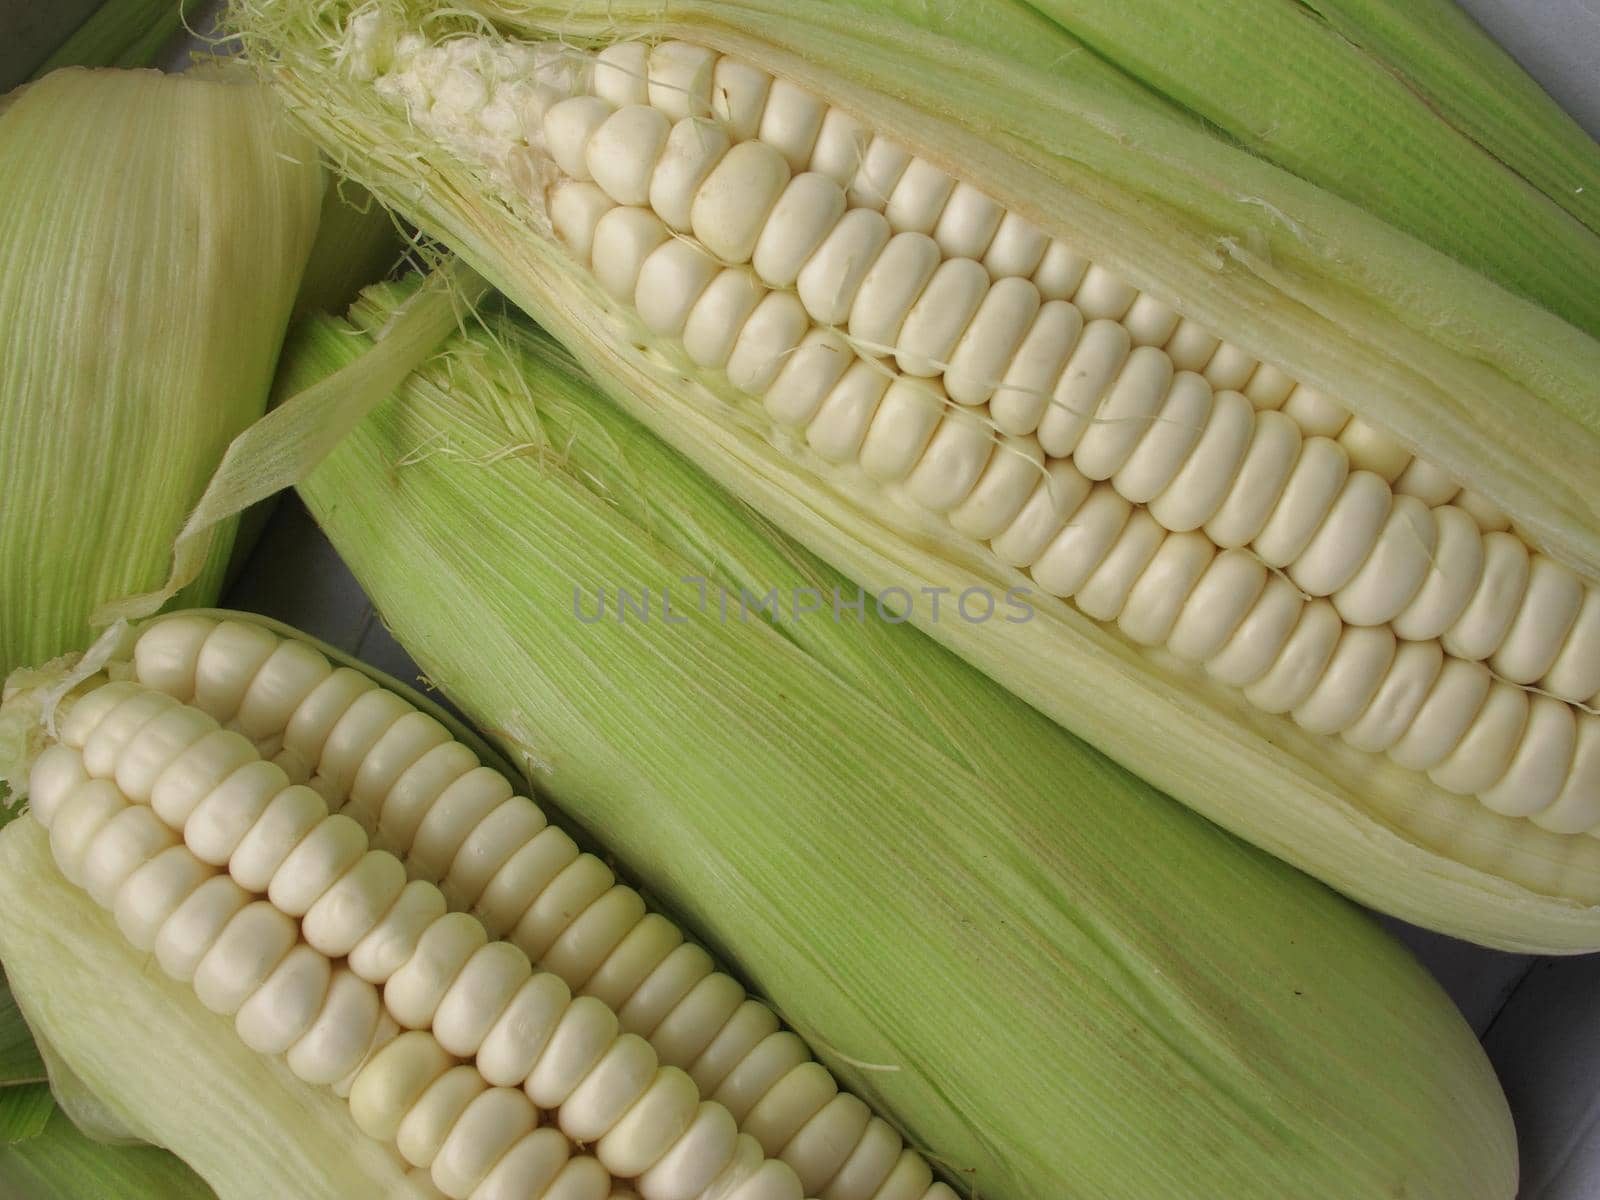 Corn cob background - vegetable collection